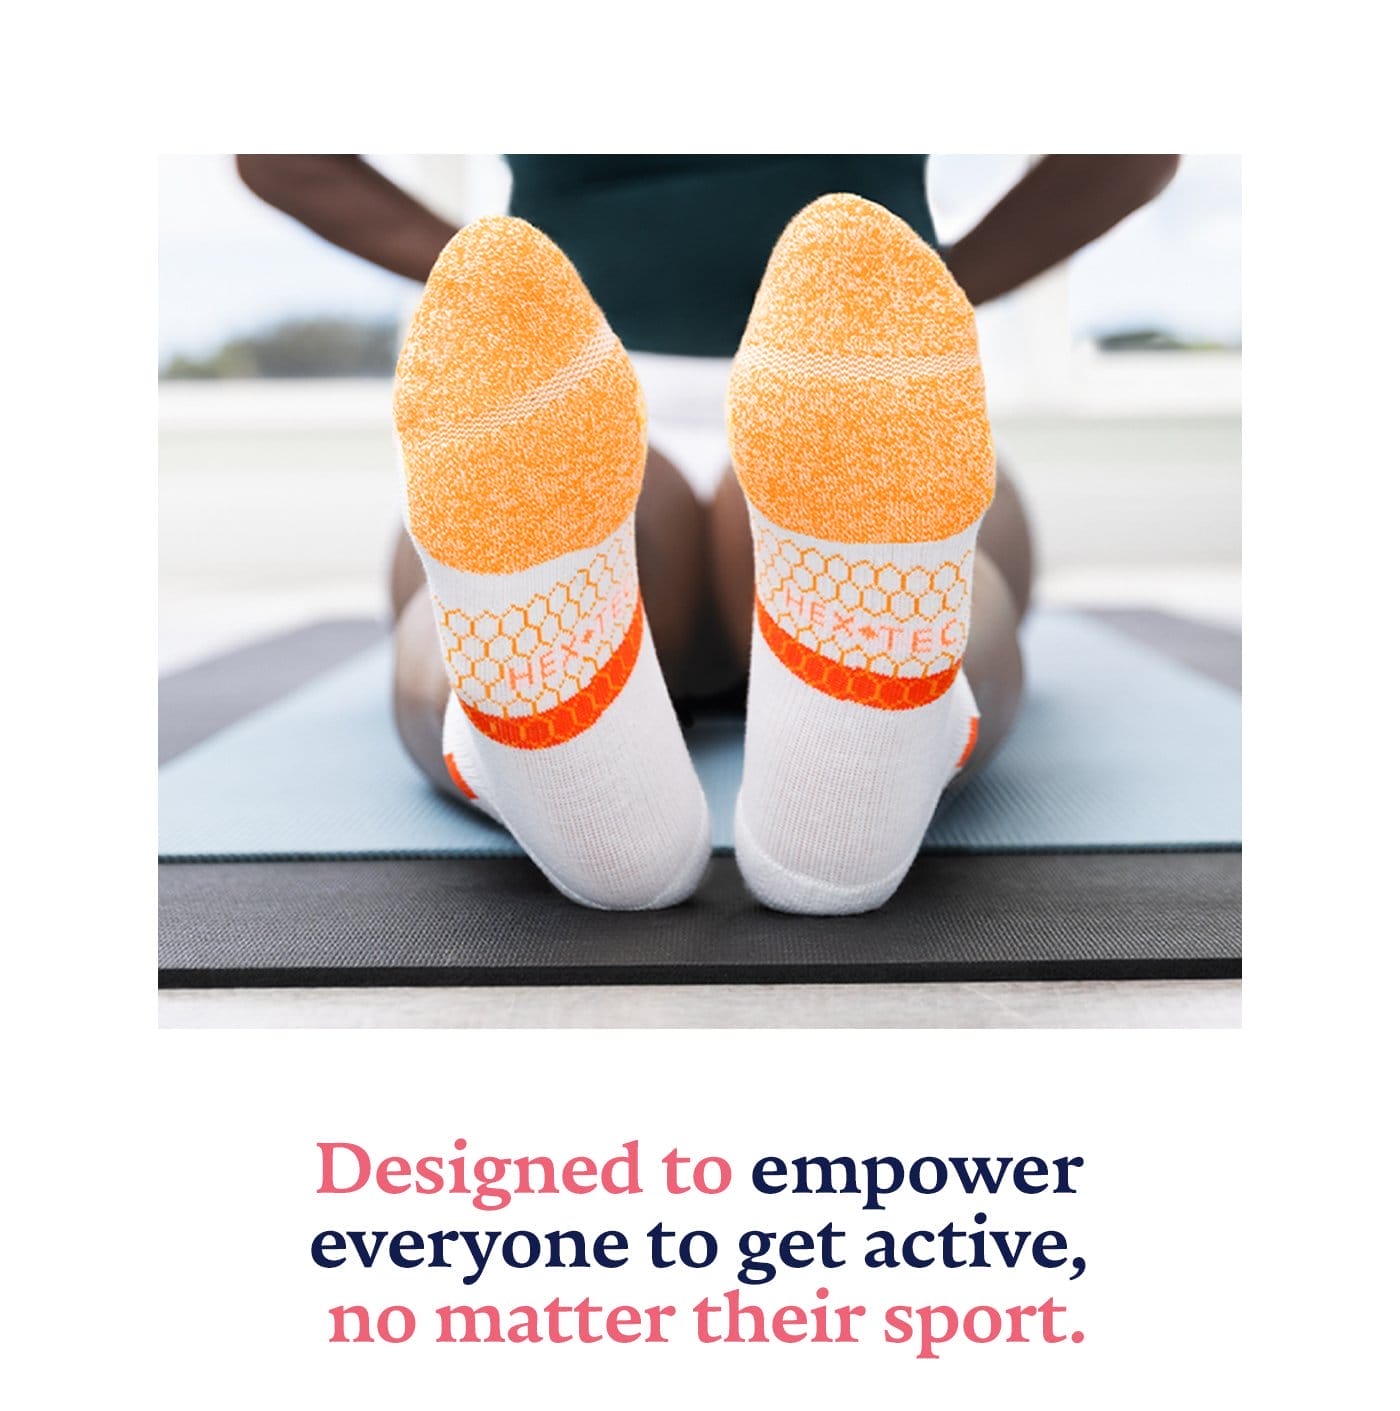 Designed to empower everyone to get active, no matter their sport.